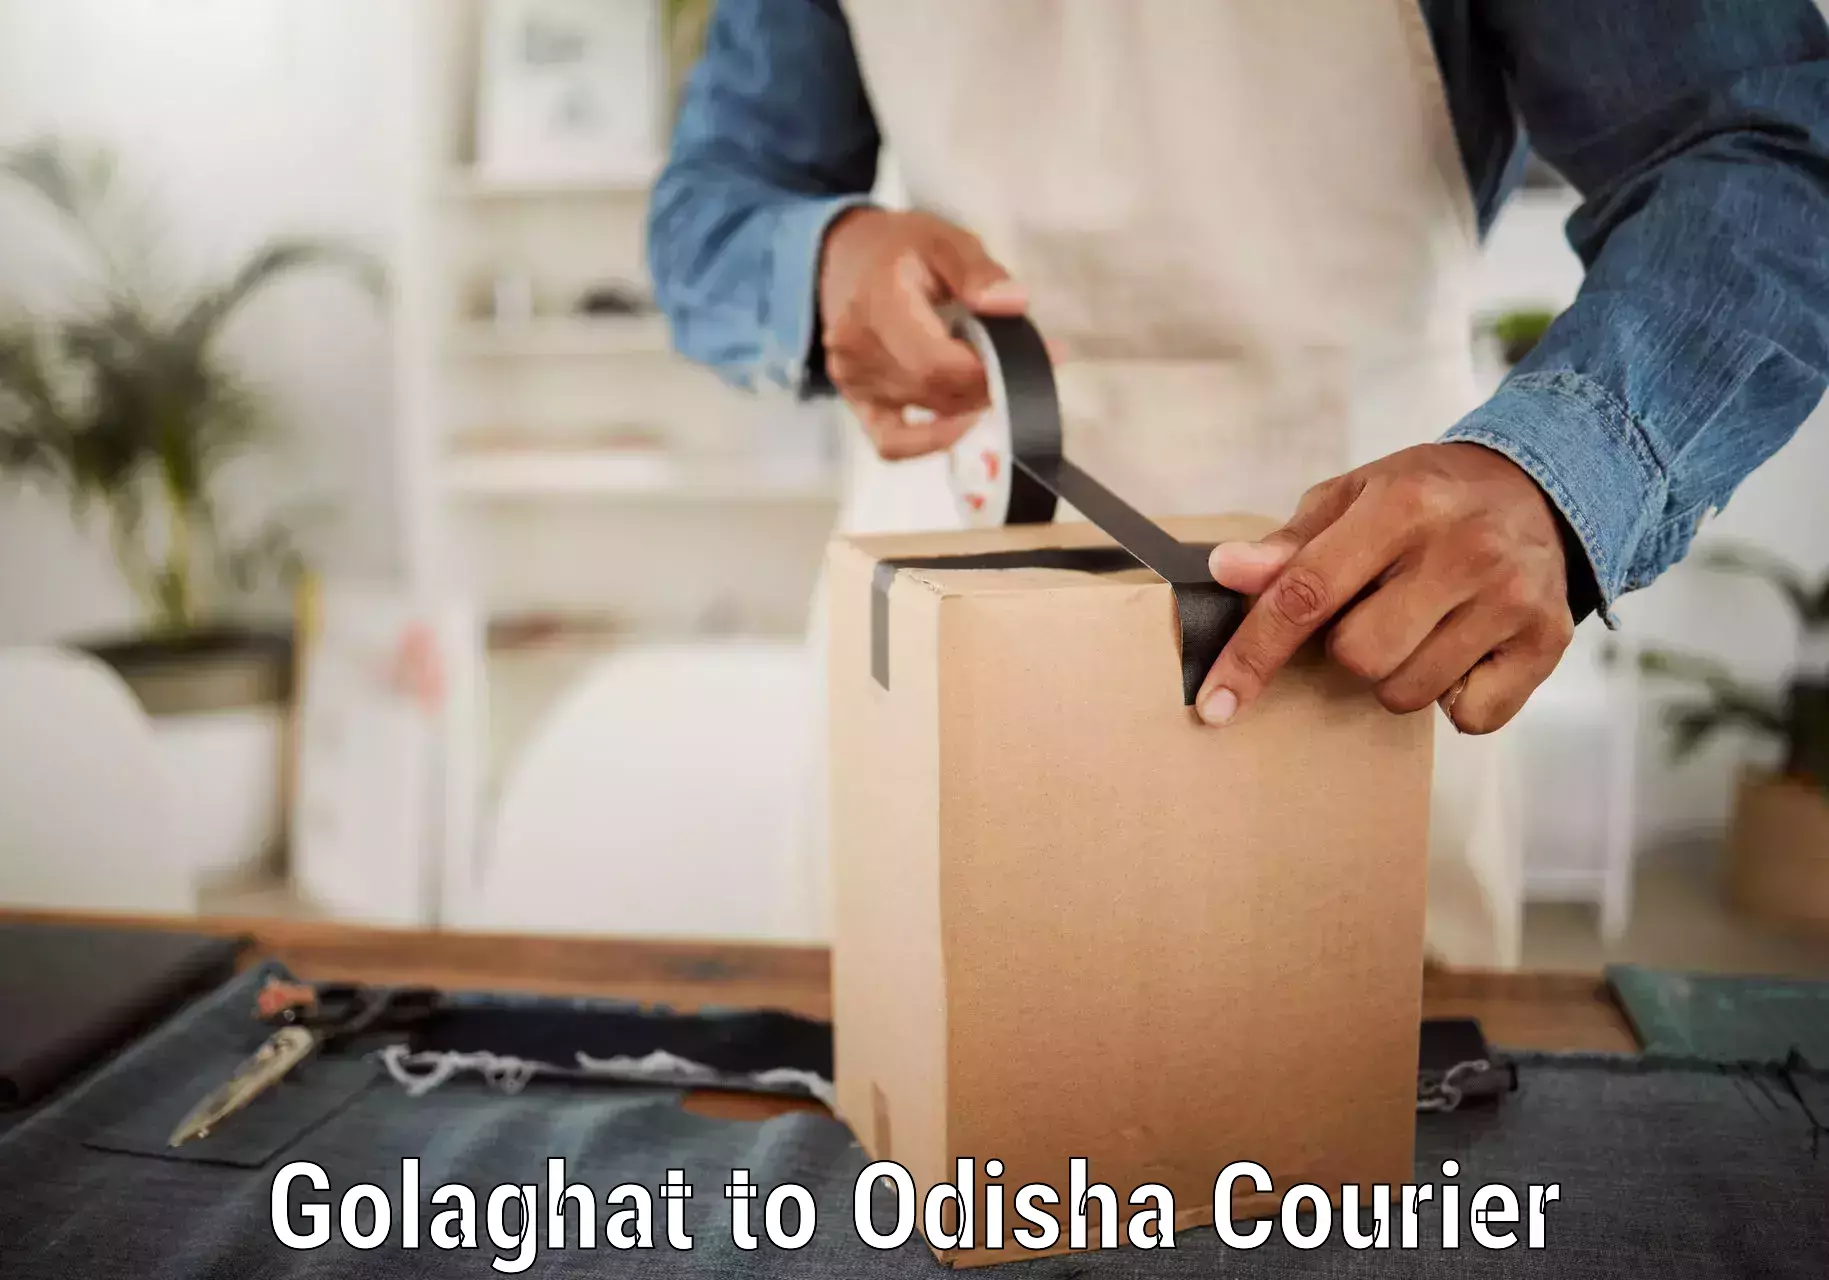 Courier service innovation Golaghat to Gajapati